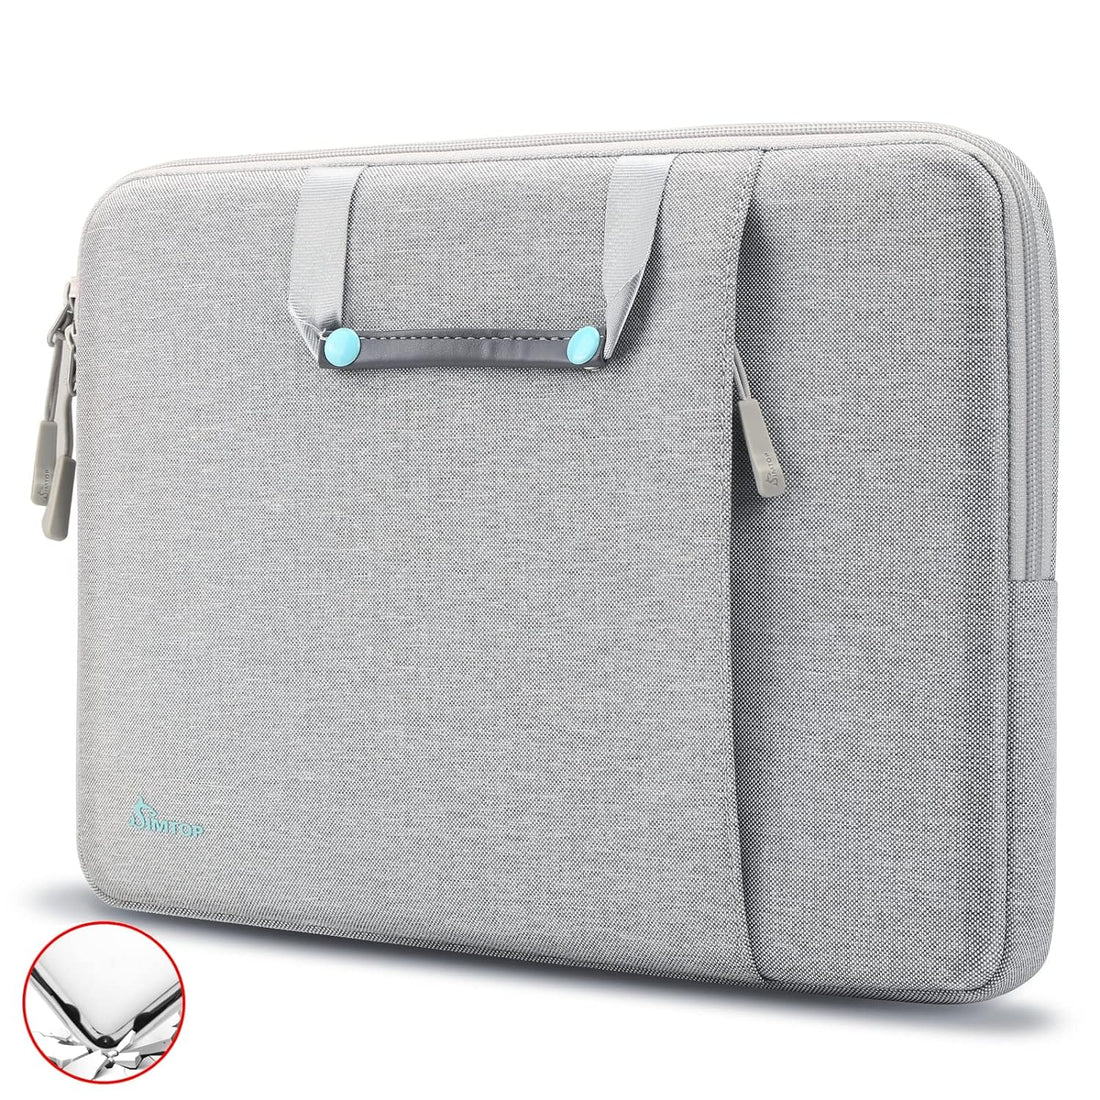 Laptop Sleeve for 15 Inch Microsoft Surface Laptop 4/3, Laptop Case 2020 Dell XPS 15, 15 inch MacBook Pro A1990 A1707, Laptop Cover HP Acer Dell Chromebook 14, Waterproof YKK Zipper Bag Polyester…